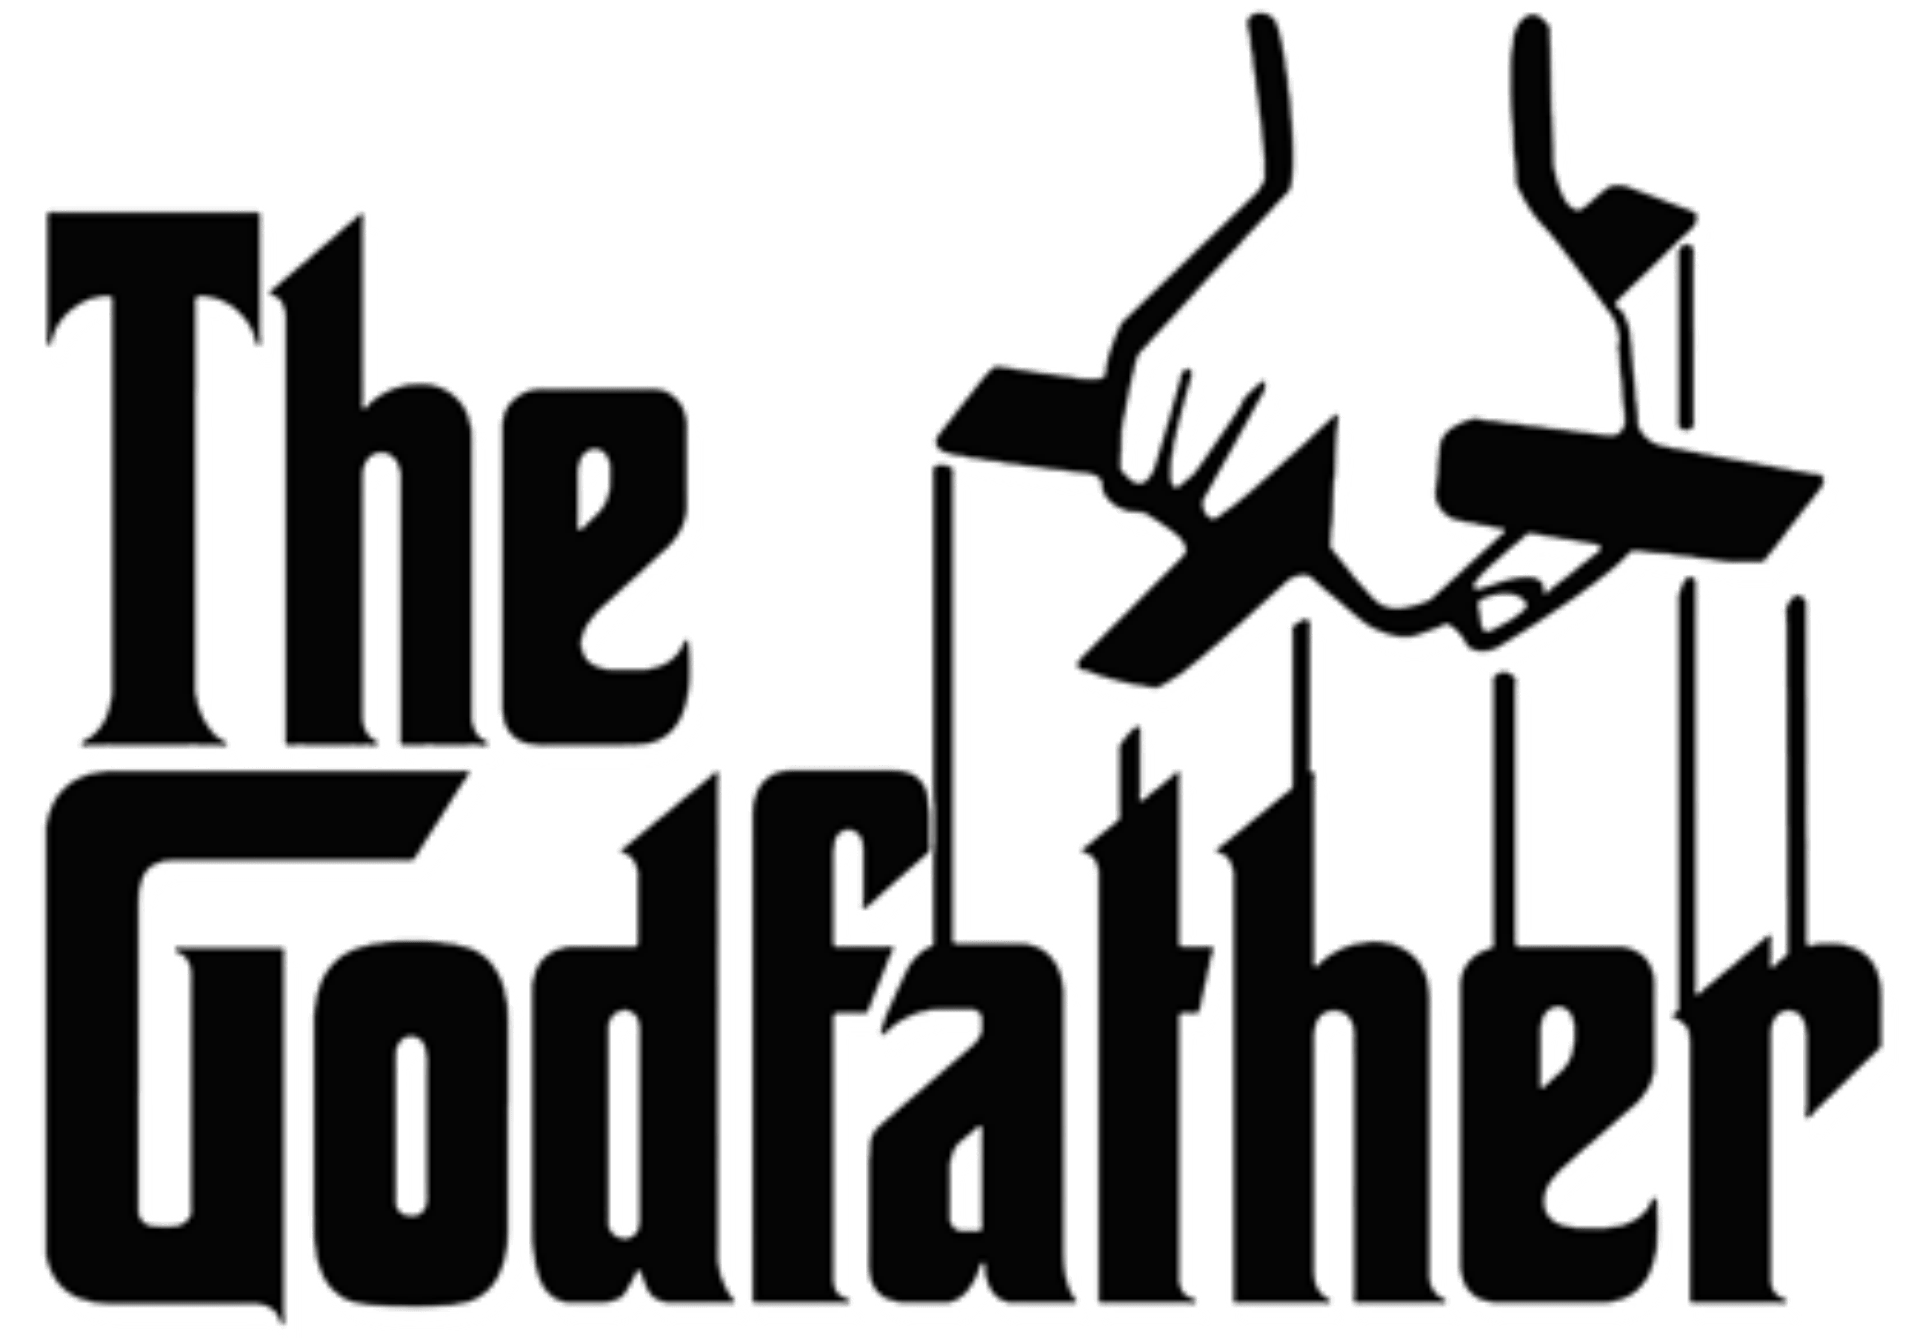 1920 Movie Logo - File:The Godfather movie logo.png - Wikimedia Commons